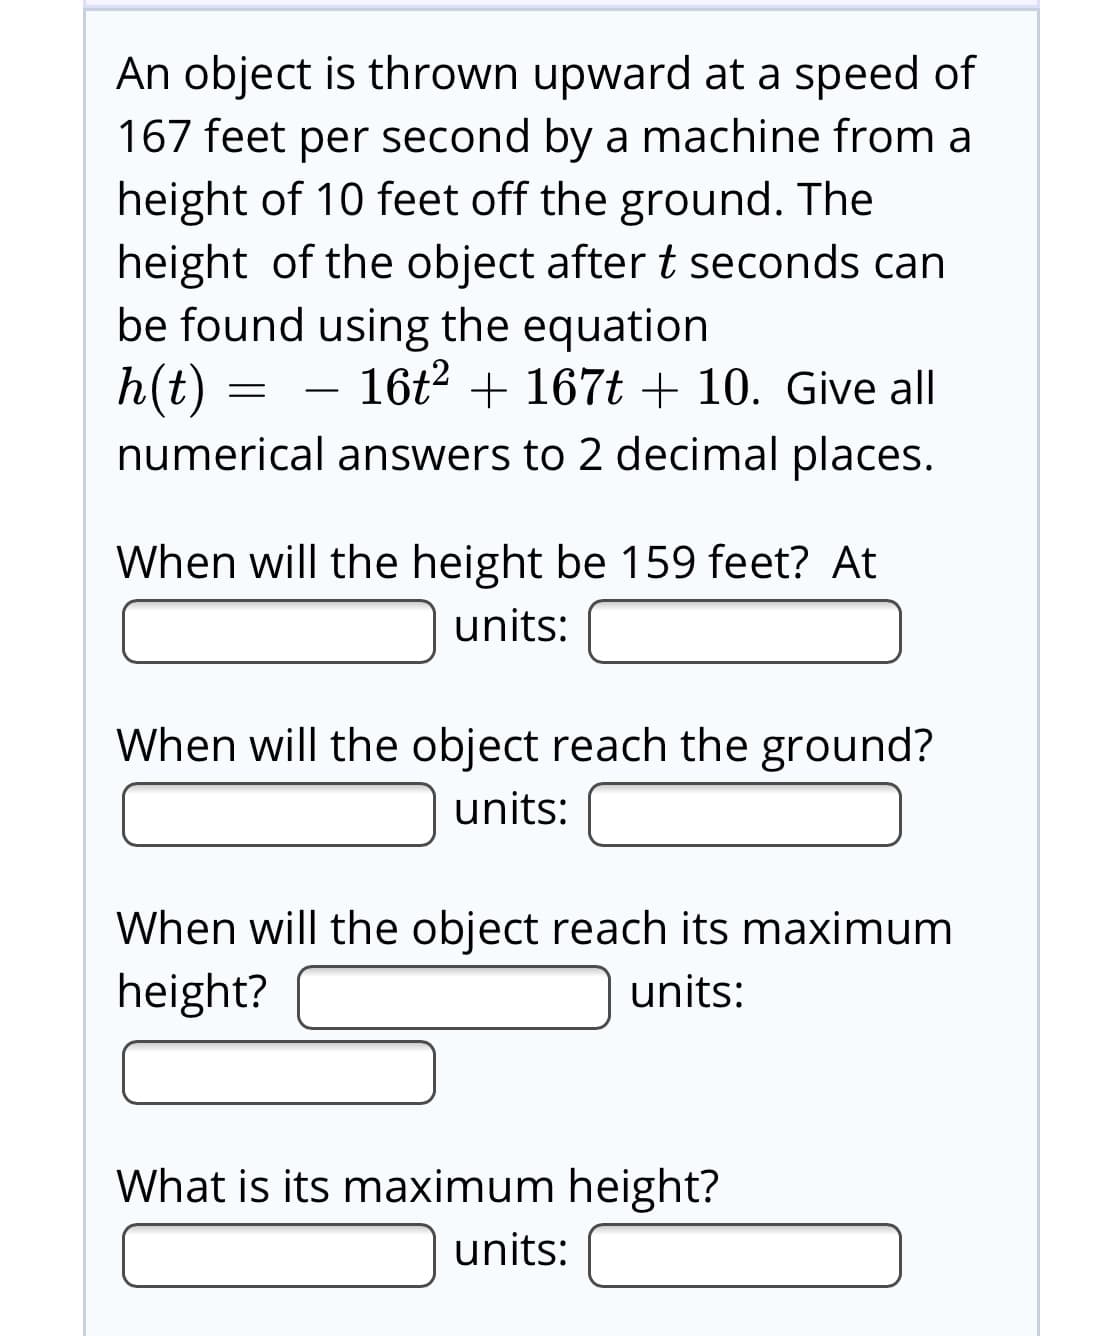 An object is thrown upward at a speed of
167 feet per second by a machine from a
height of 10 feet off the ground. The
height of the object after t seconds can
be found using the equation
h(t) =
16t2 + 167t + 10. Give all
numerical answers to 2 decimal places.
When will the height be 159 feet? At
units:
When will the object reach the ground?
units:
When will the object reach its maximum
height?
units:
What is its maximum height?
units:
